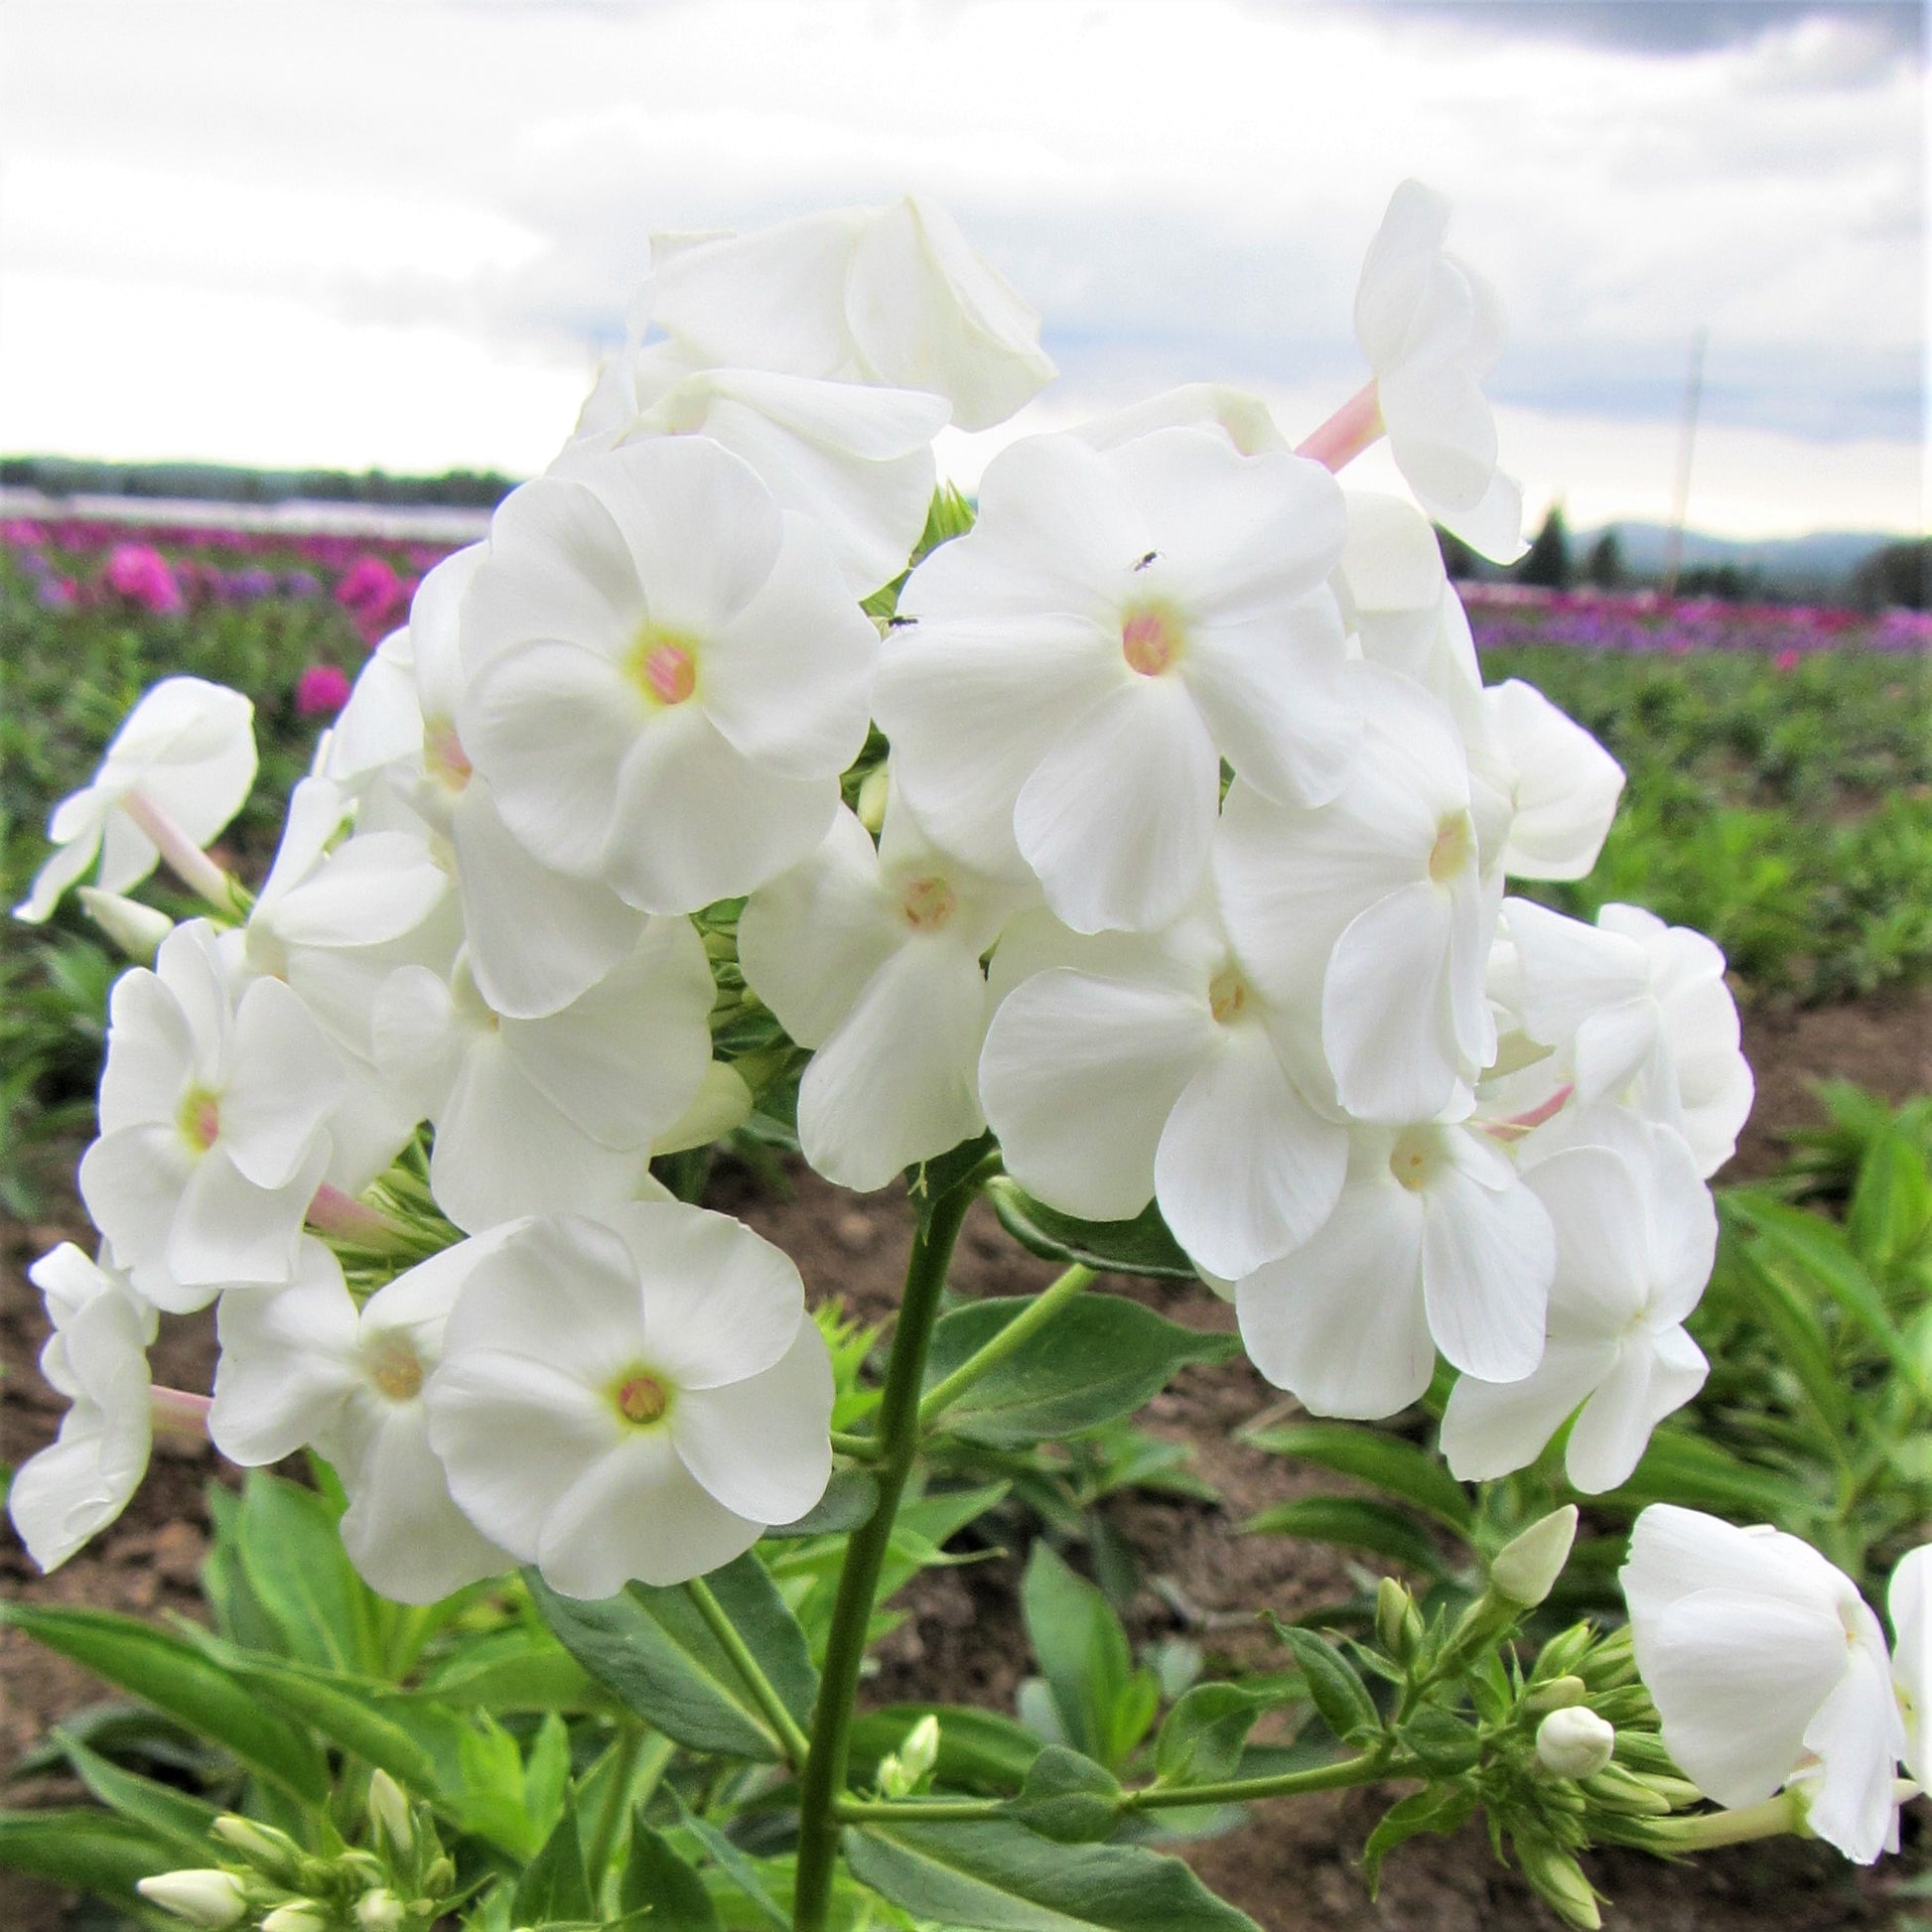 A Cluster of White "David" Phlox